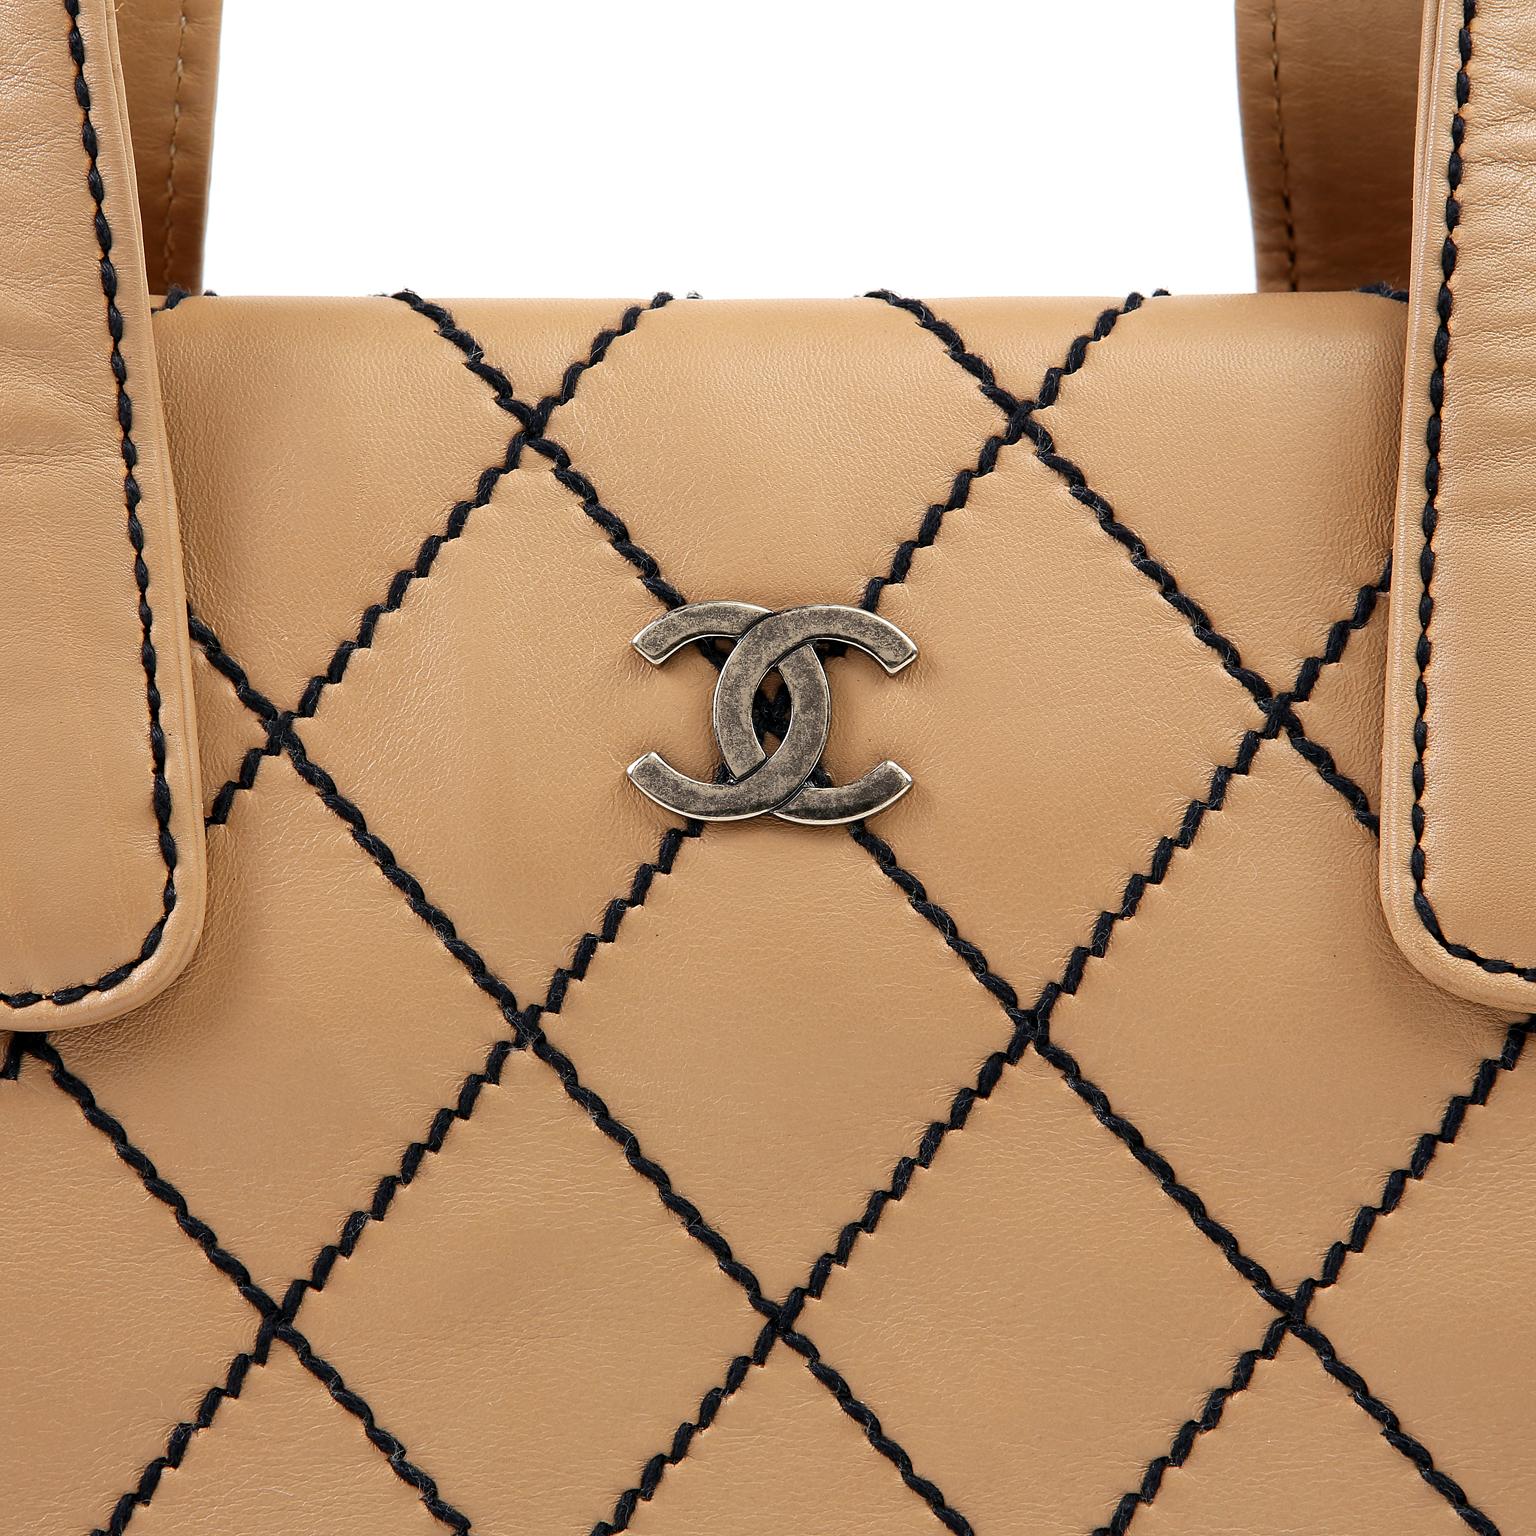 Chanel Beige Leather Tote with Black Top Stitching 4